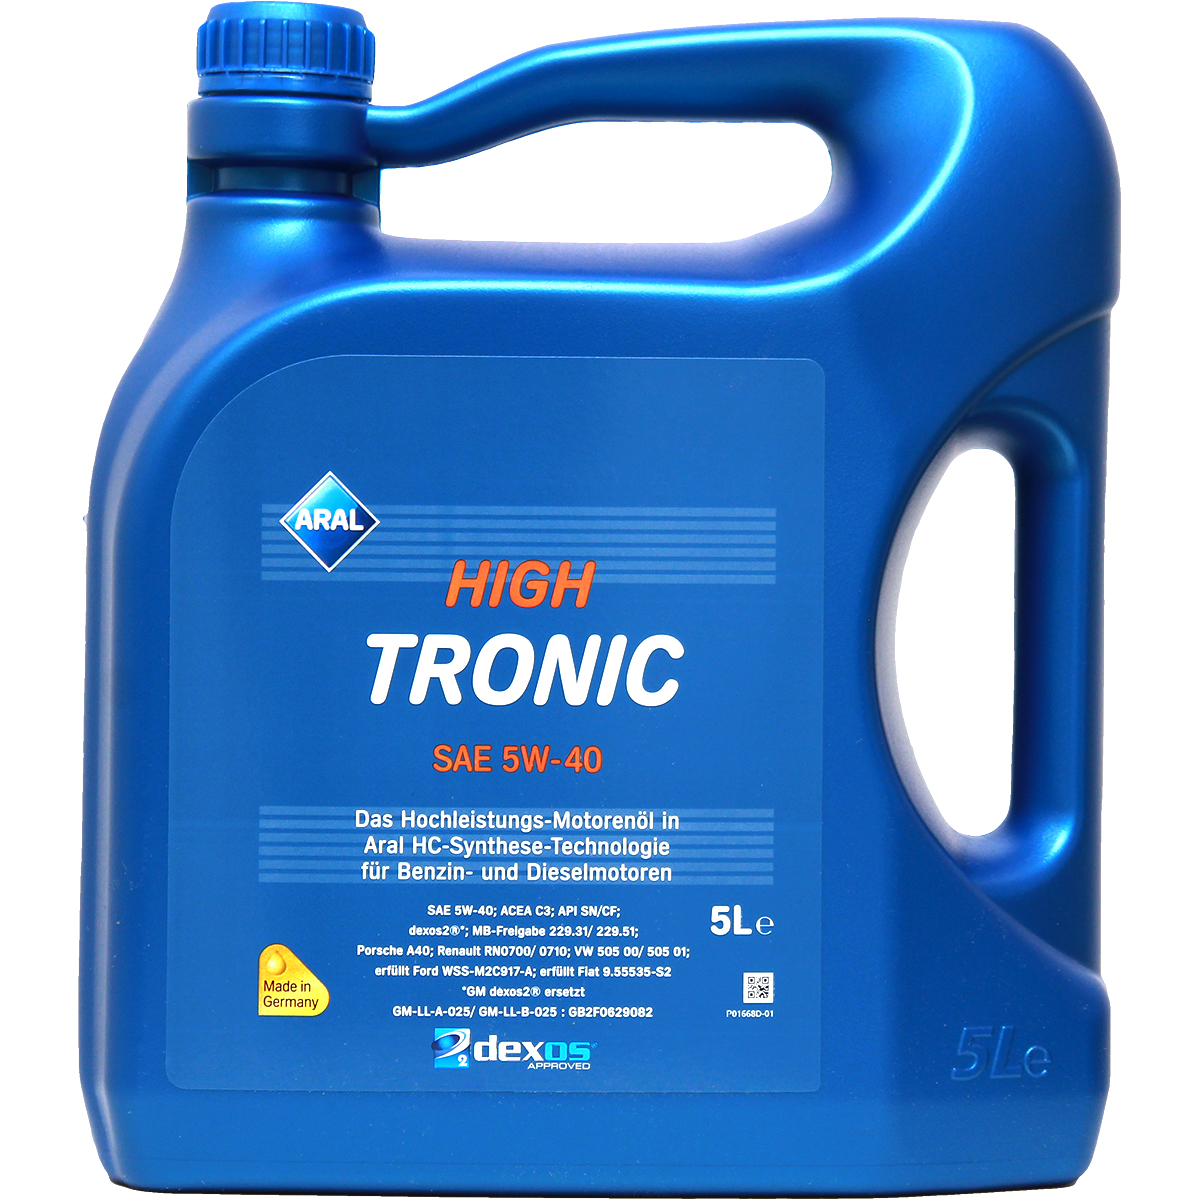 Aral HighTronic 5W-40 5+1 Liter